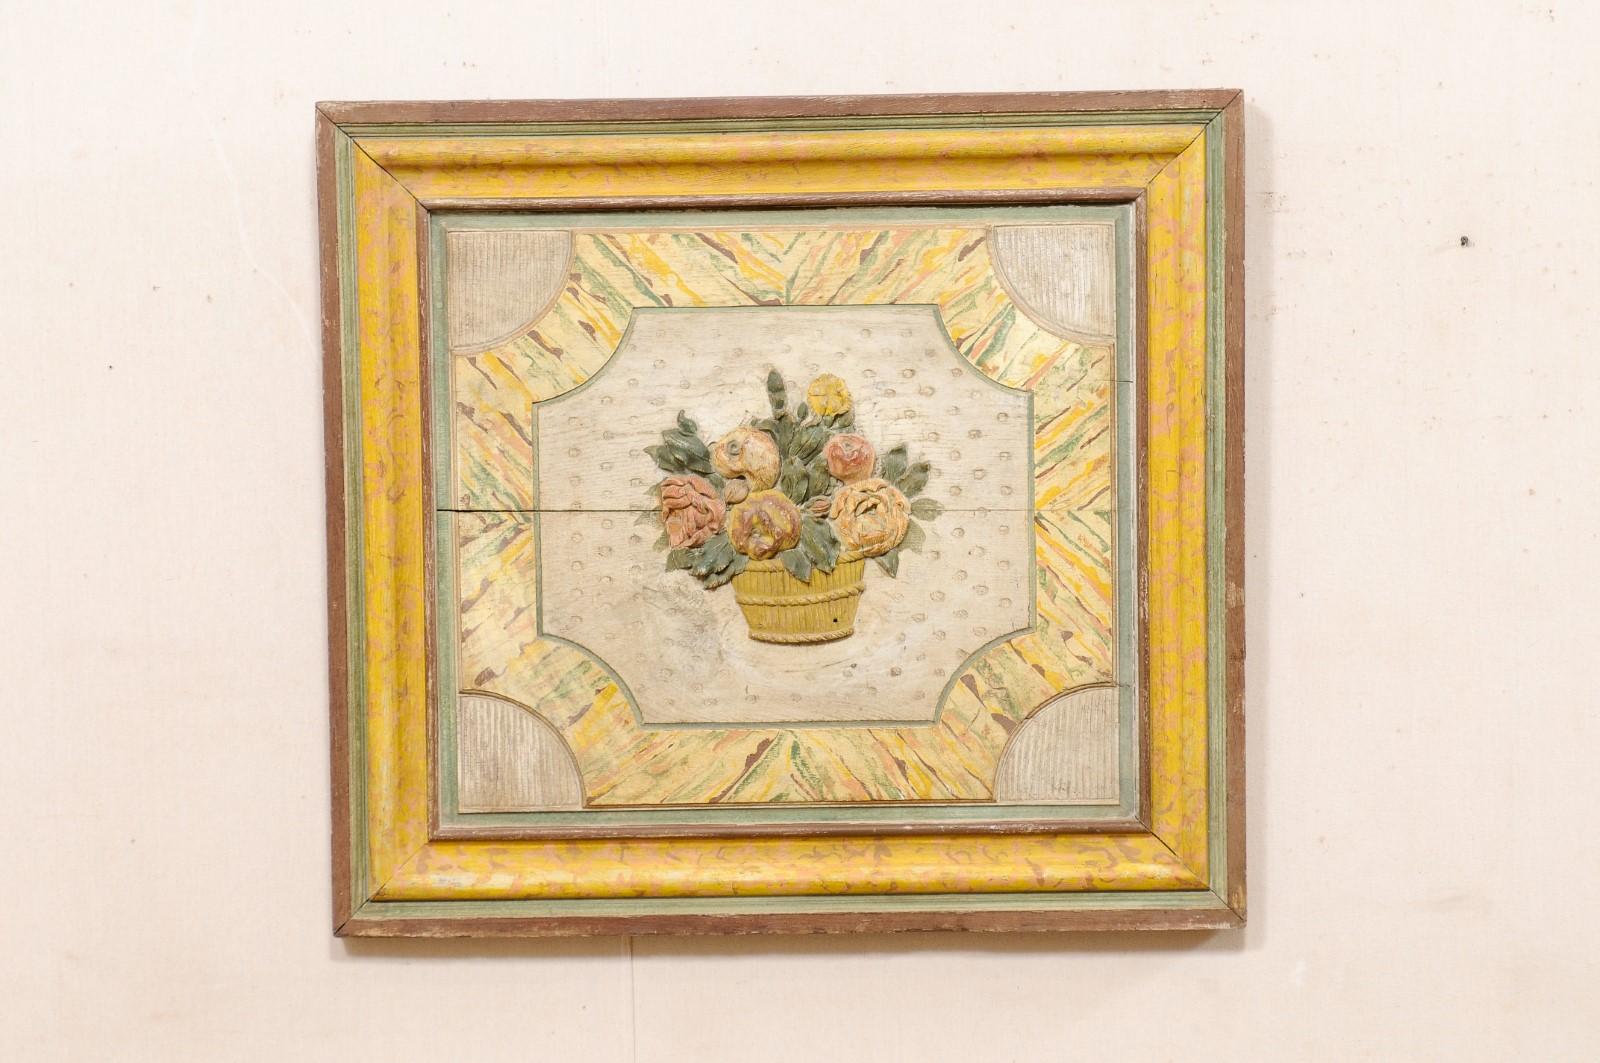 A French floral bouquet carved wooden plaque, with its original paint, from the 18th century. This antique wall decoration from France is nearly-square in shape, featuring a carved bucket with floral bouquet, with a textured and colorful adornment,